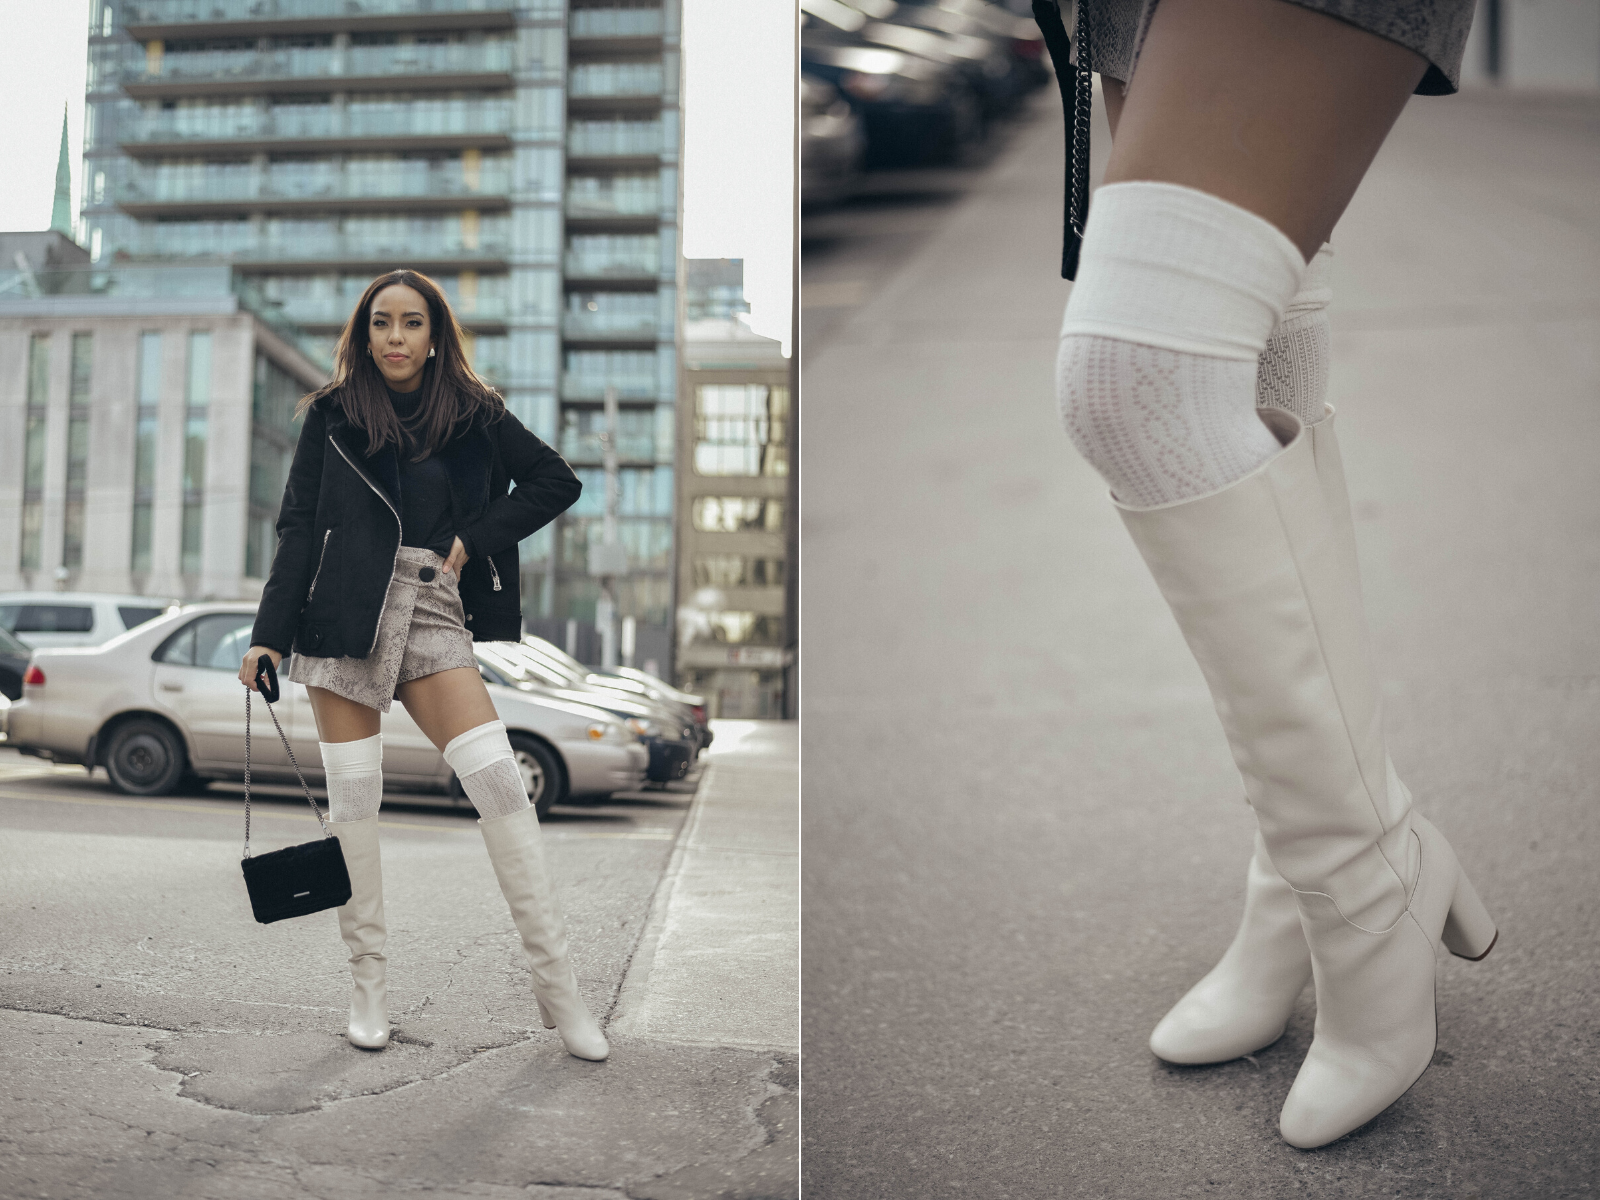 How to Wear Over-the-Knee Socks: 6 Styling Tips – From Rachel